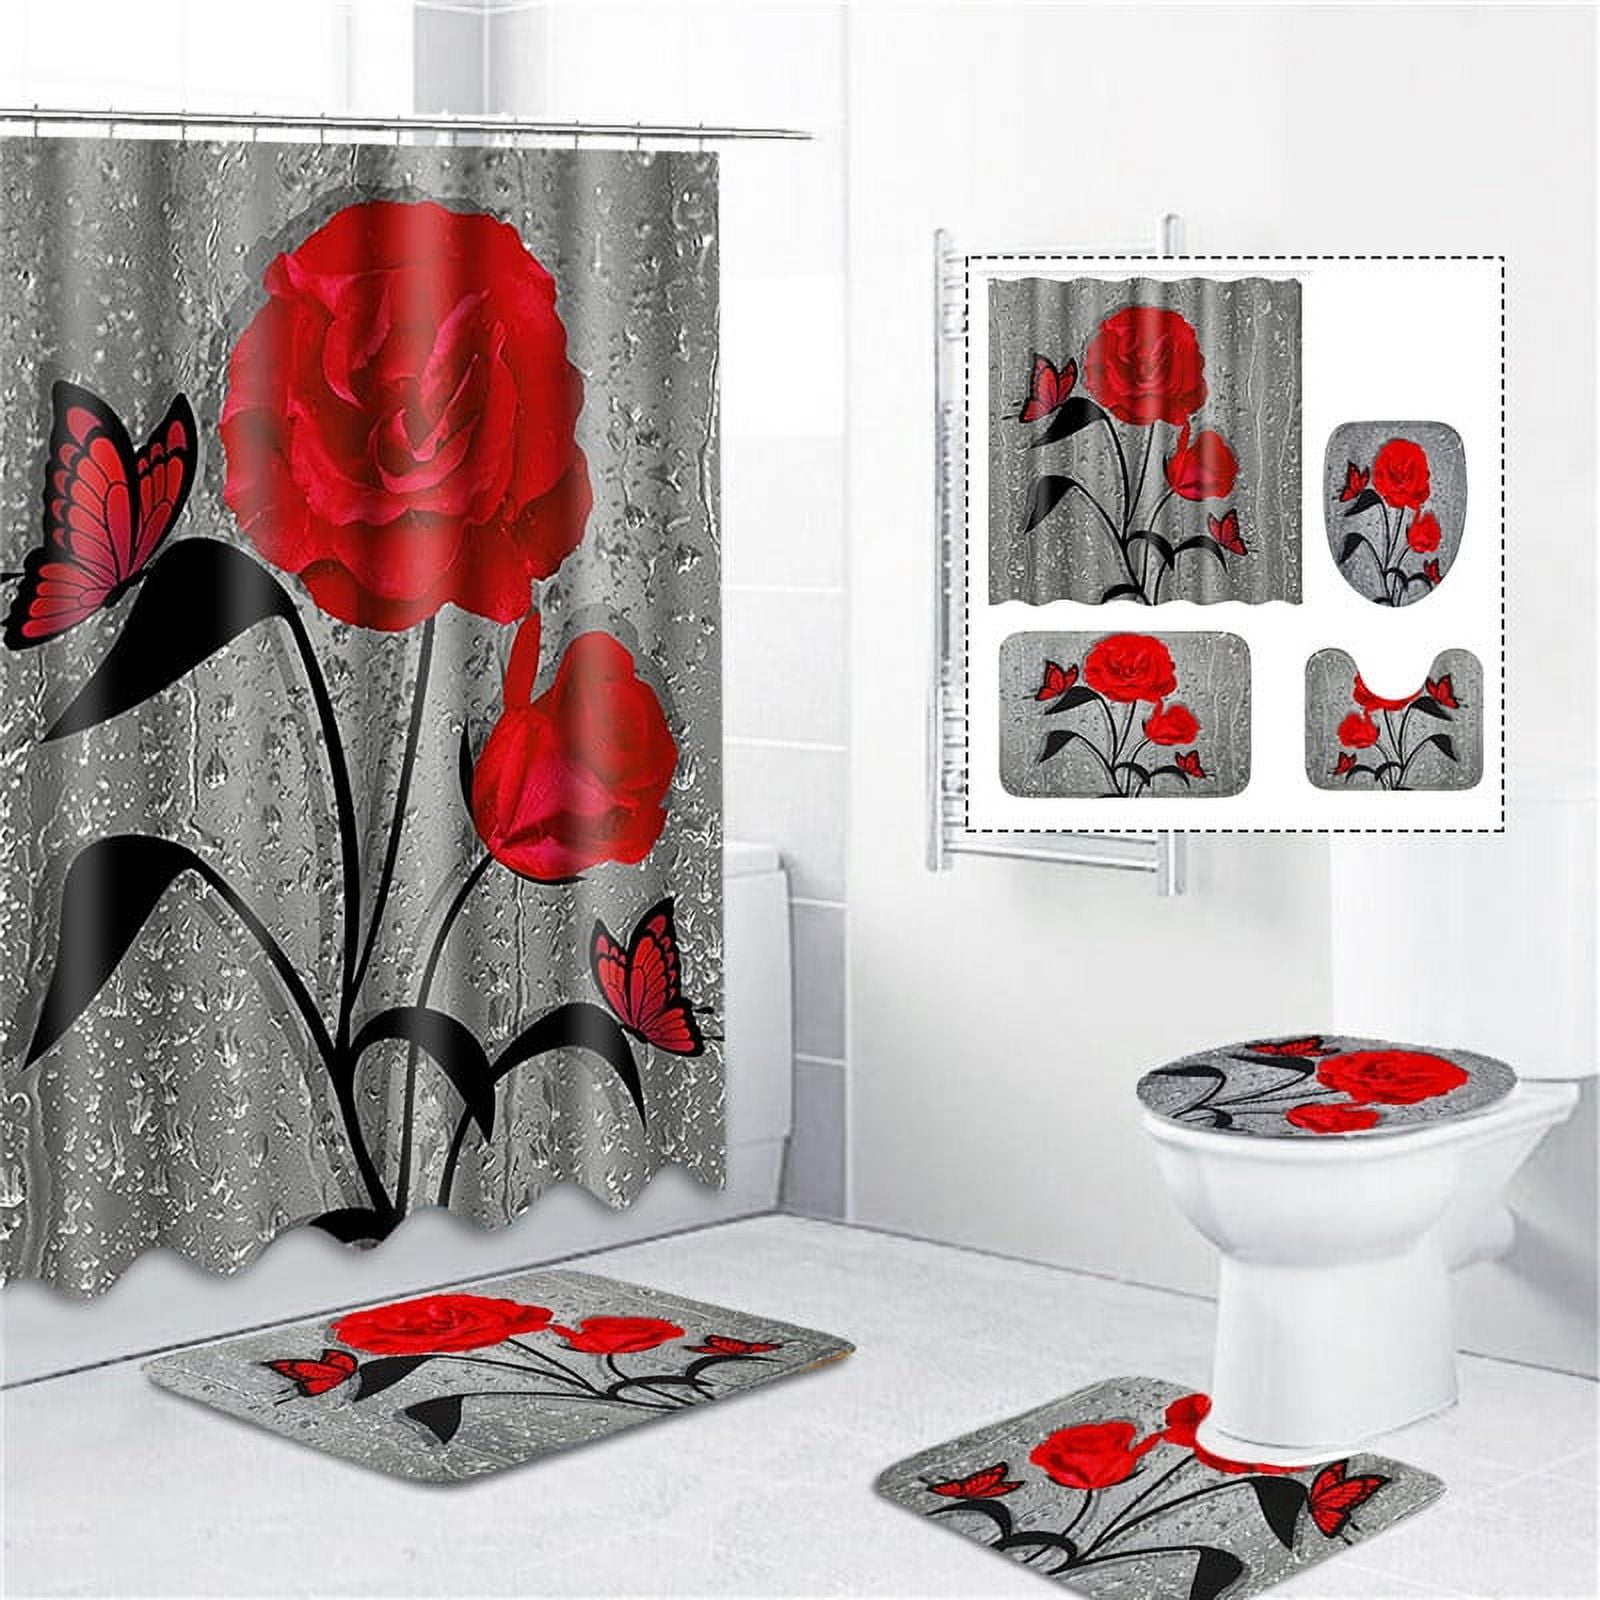 4 Pcs Bathroom Shower Curtain Set,Waterproof Red Rose Valentine's Day Shower Curtain Sets with Rugs(Bath Mat, Pedestal Rug and Toilet Lid Cover Mat)